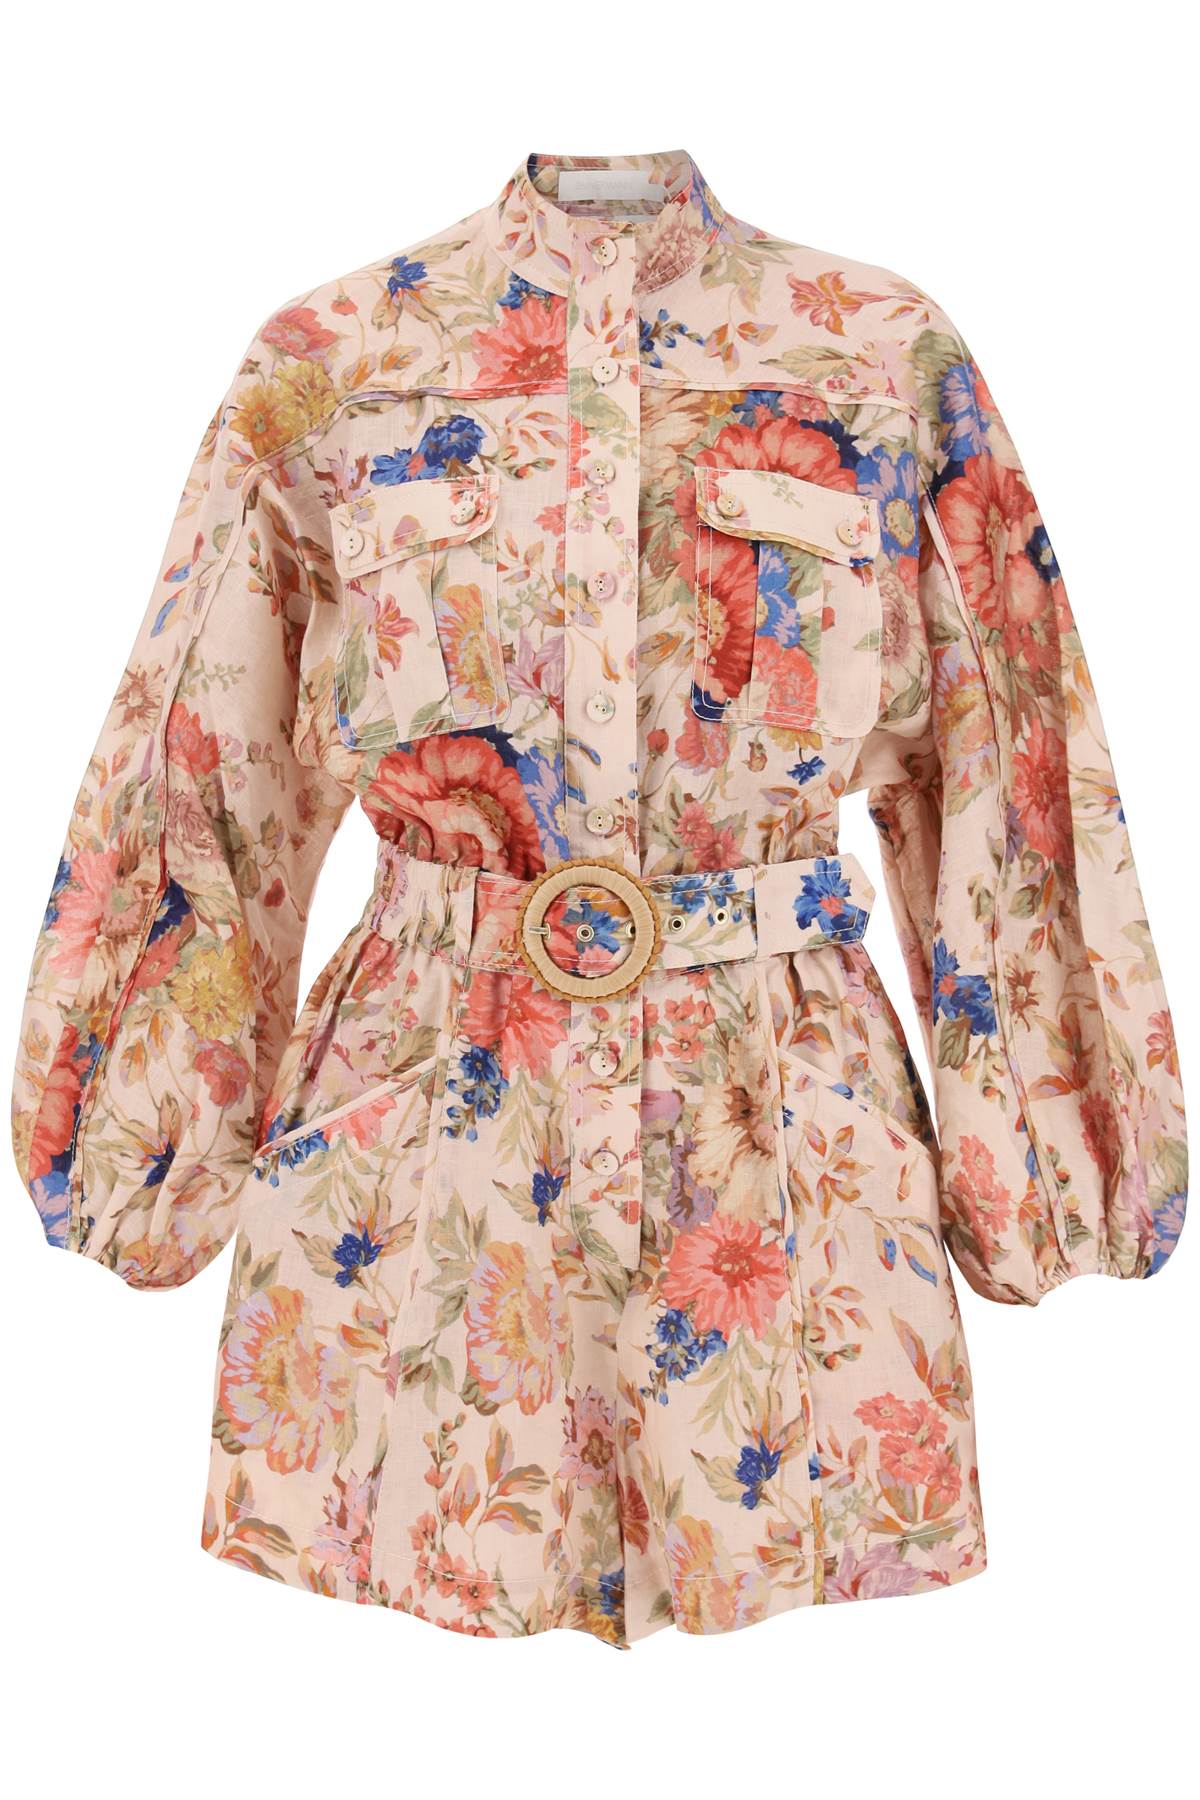 ZIMMERMANN Floral Print Button-Up Linen Playsuit with Dolman Sleeves